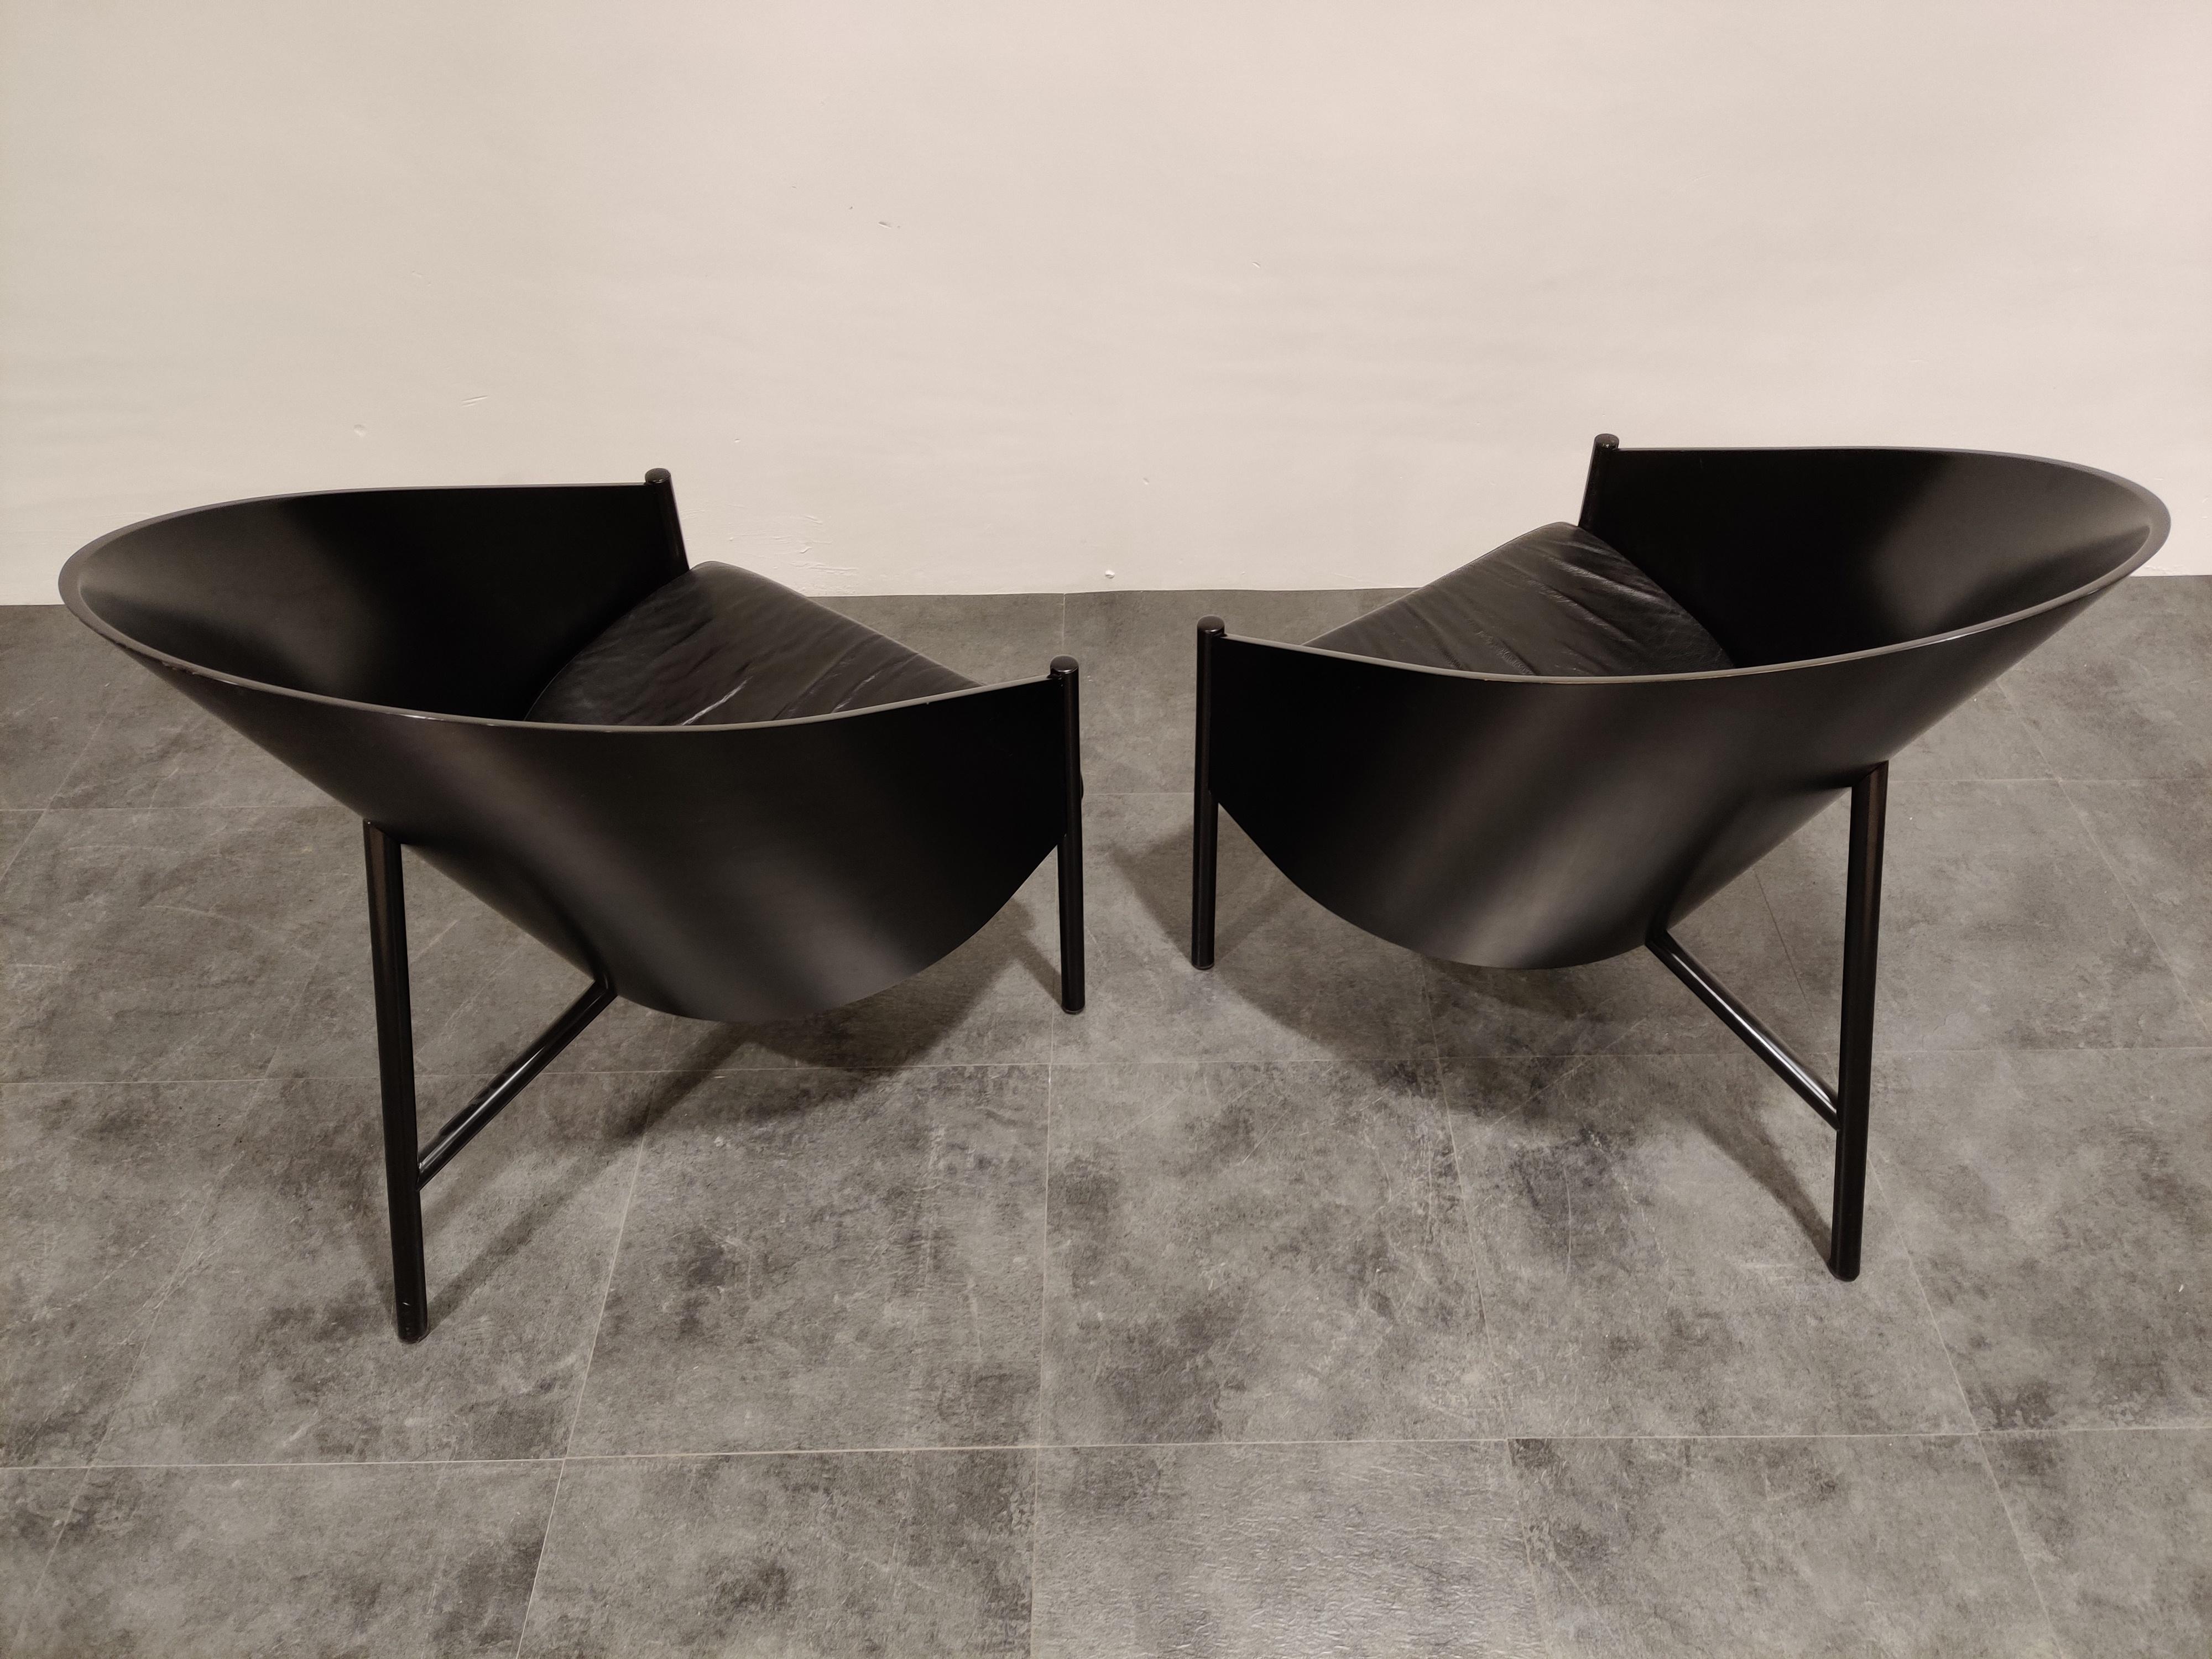 Late 20th Century Pair of Vintage Pratfall Chairs by Philippe Starck for Driade, 1982